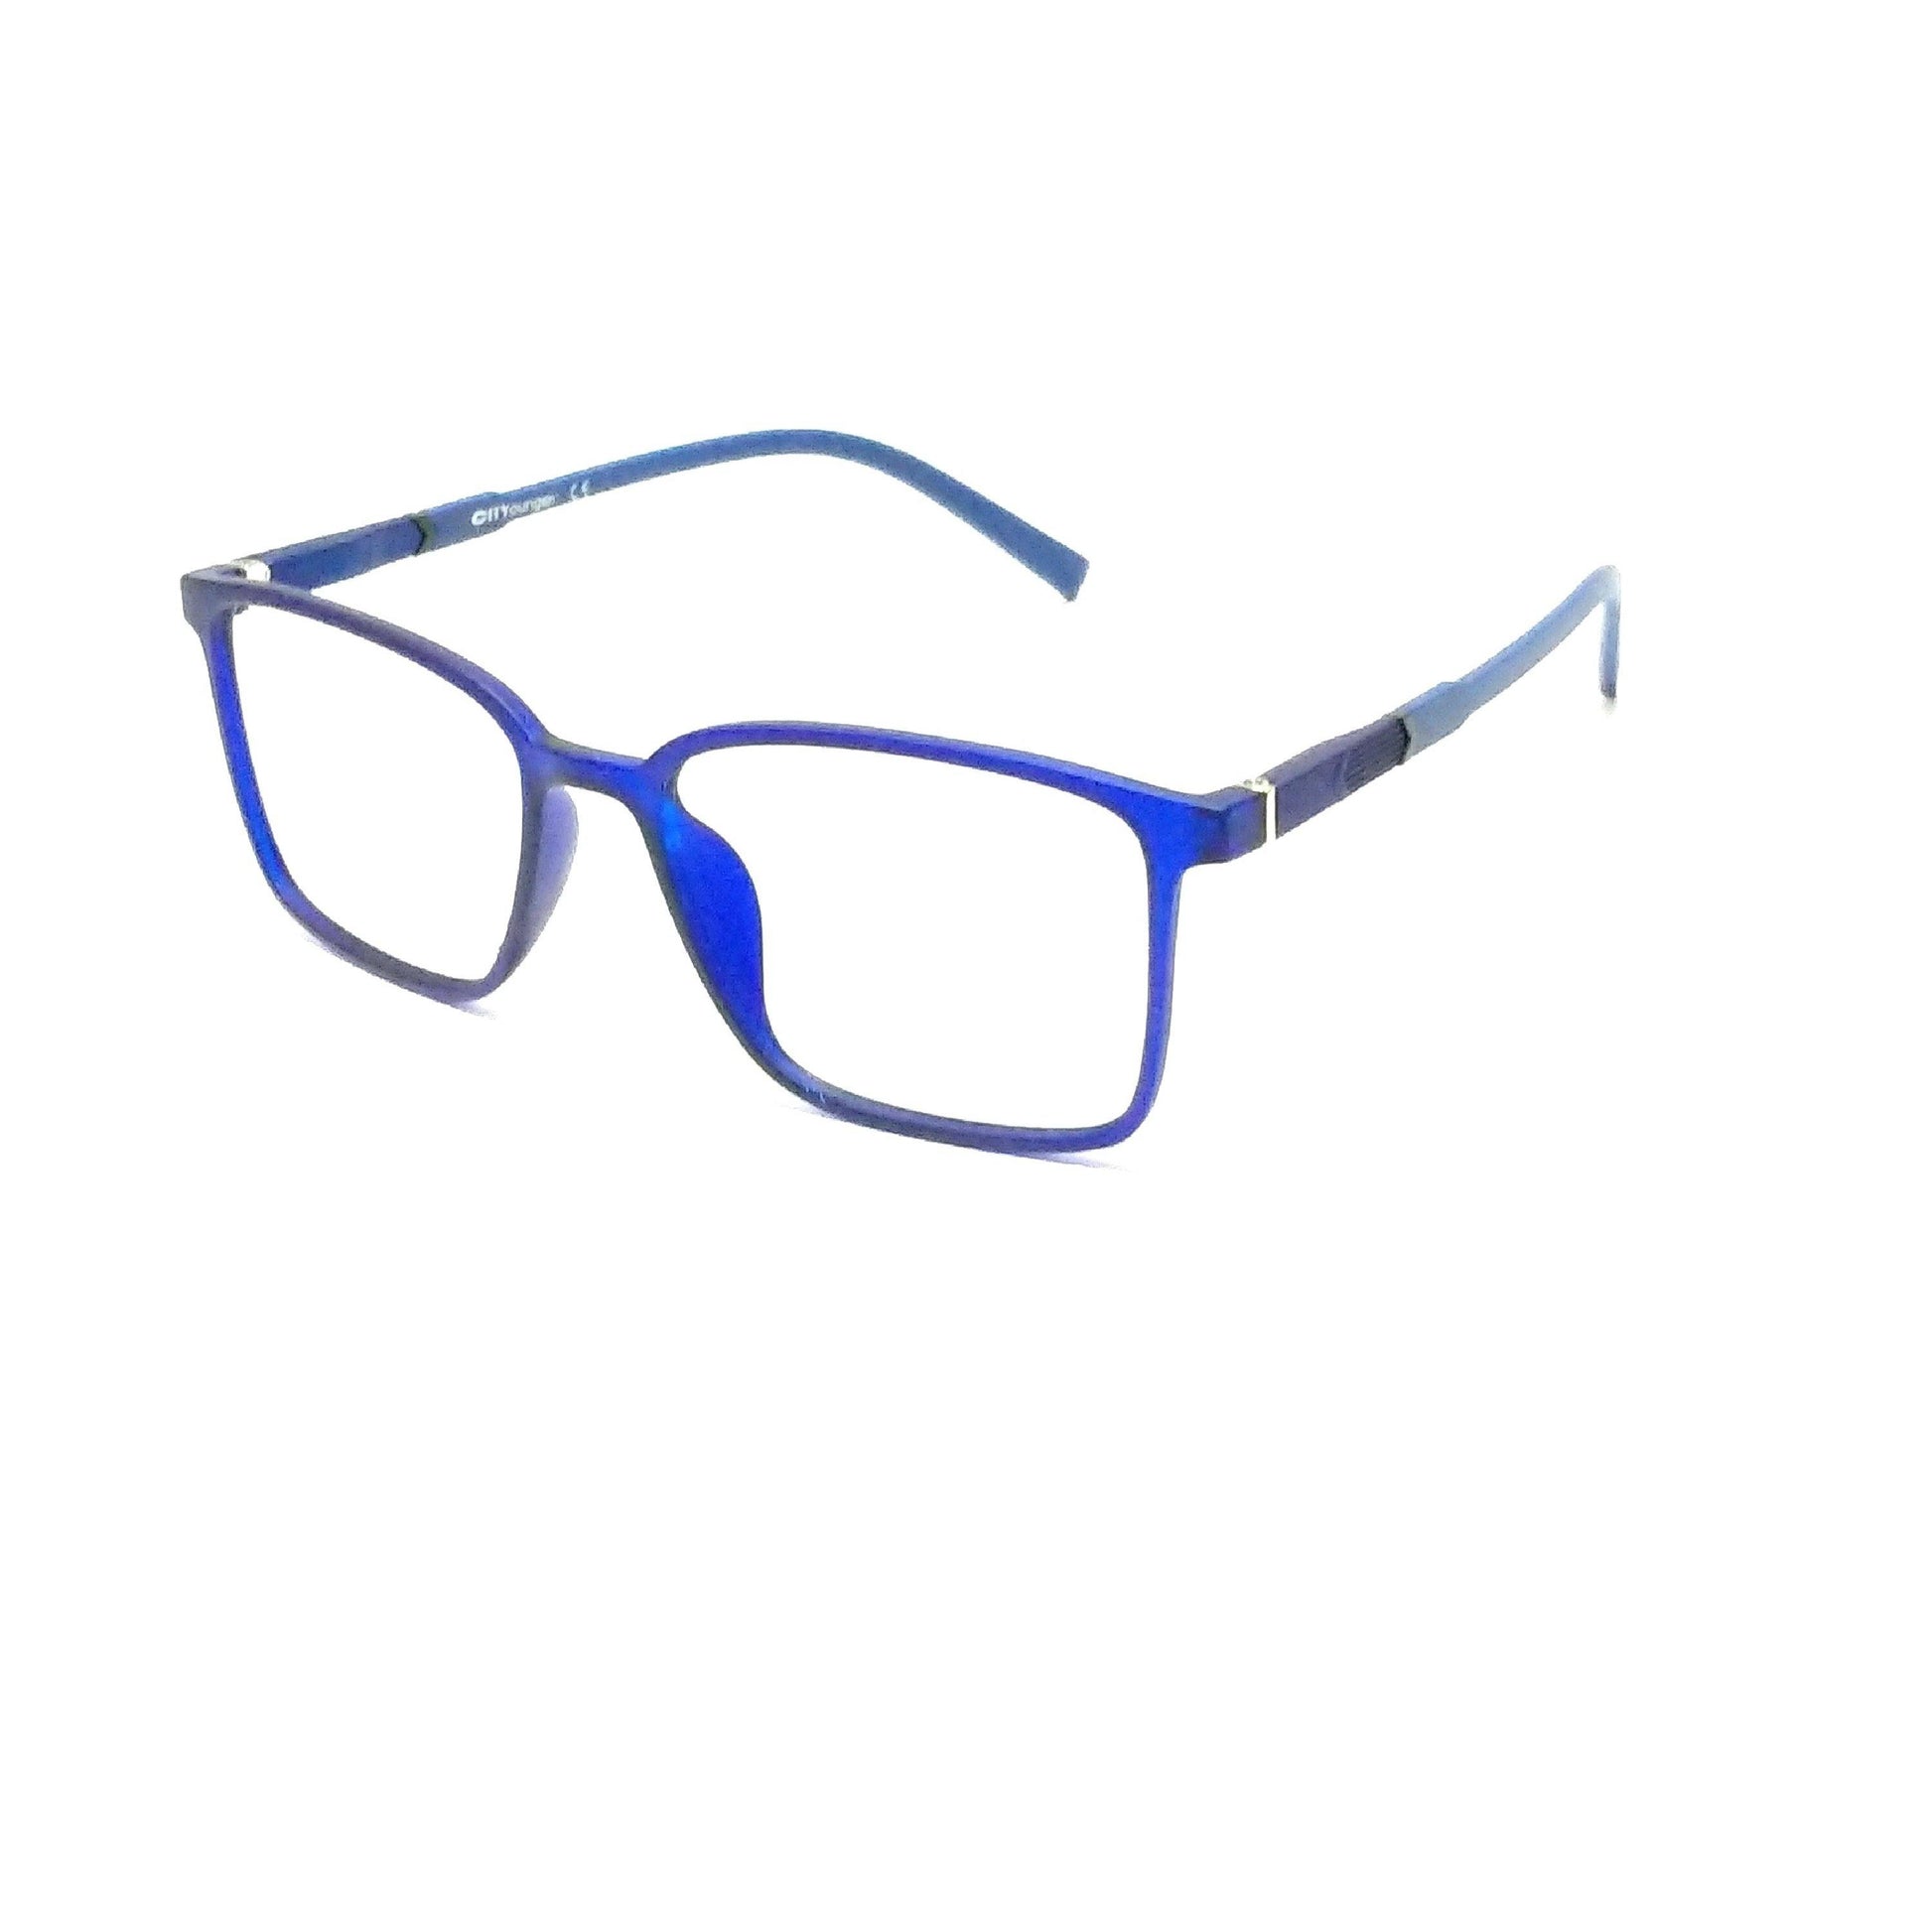 Buy Ultra Thin Lightweight TR90 Spectacle Frame Glasses for Men Women HD96715C6 - Glasses India Online in India